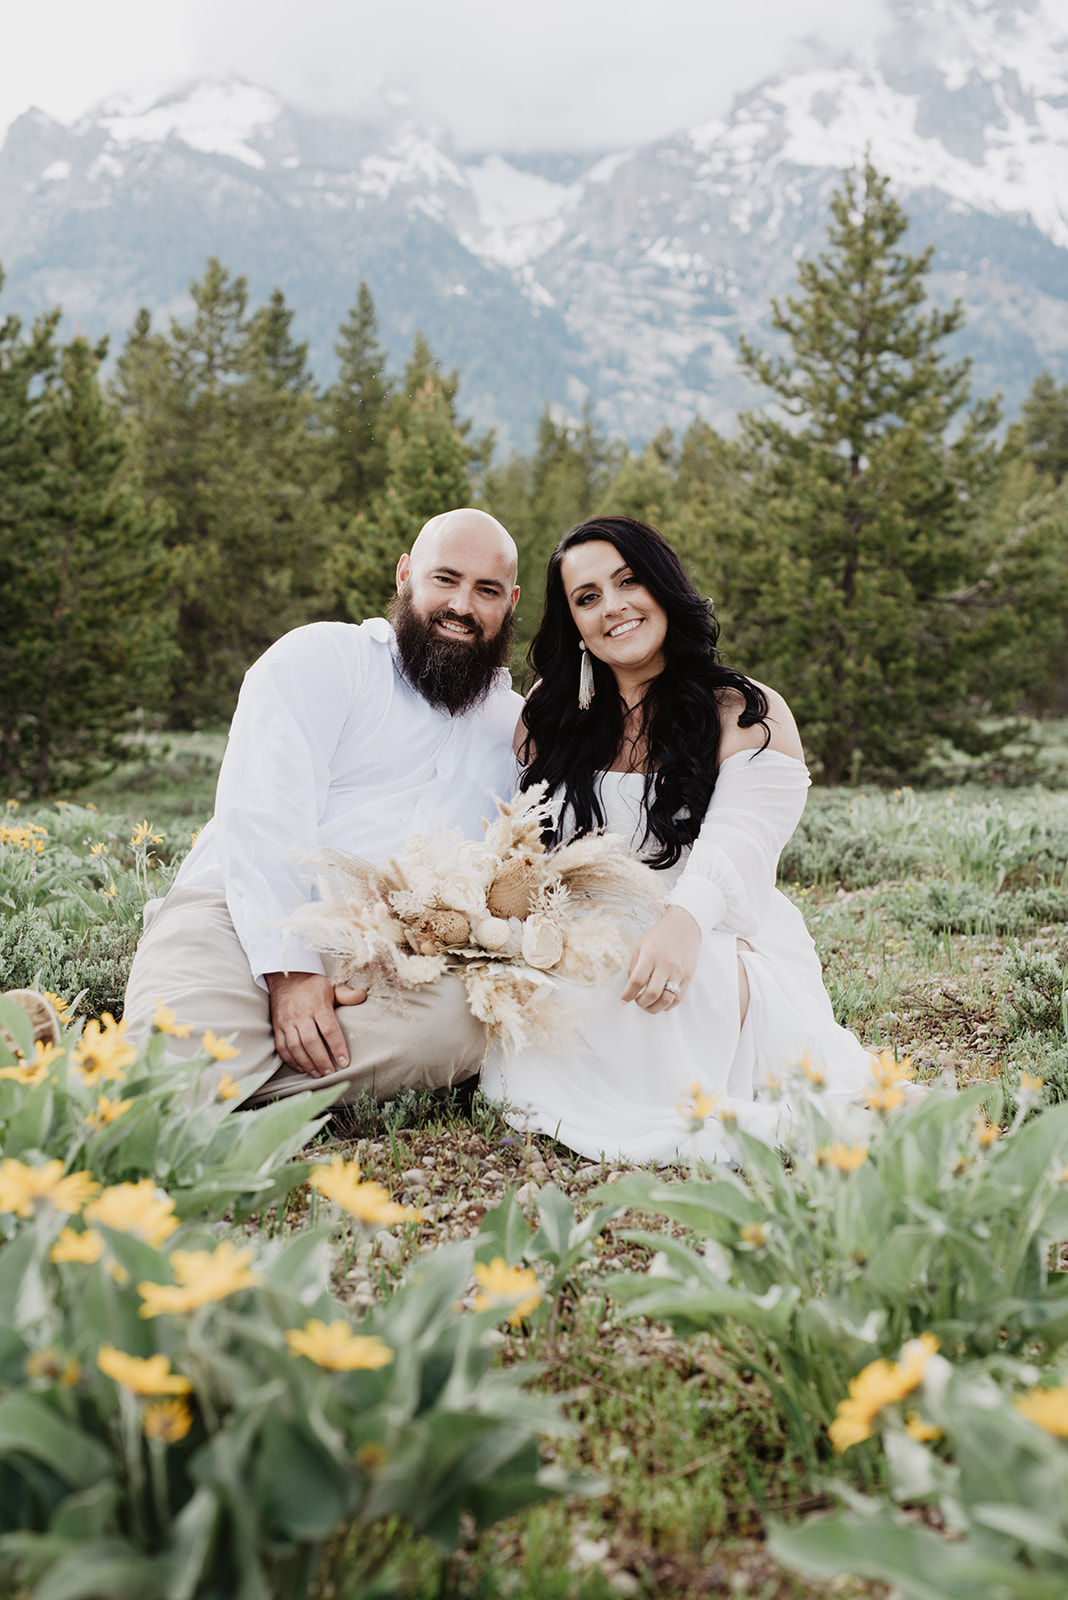 Wyoming Elopement Photographer captures couple sitting in flowers after elopement